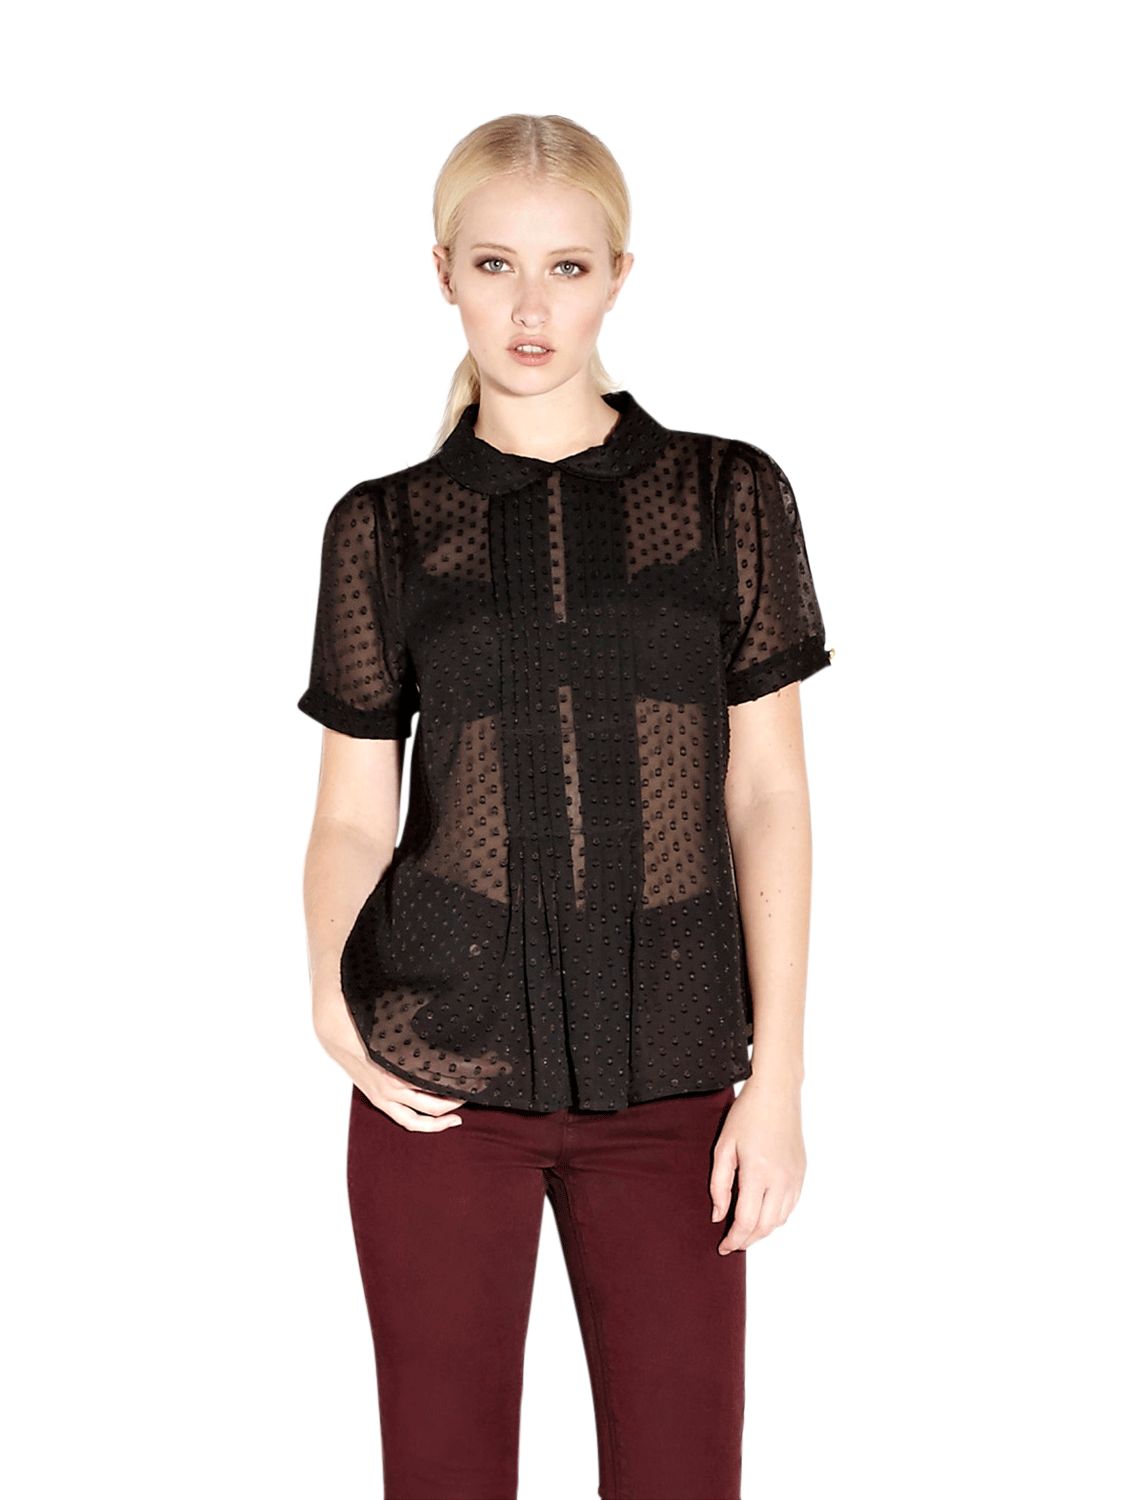 Sheer Spotted Blouse, Black